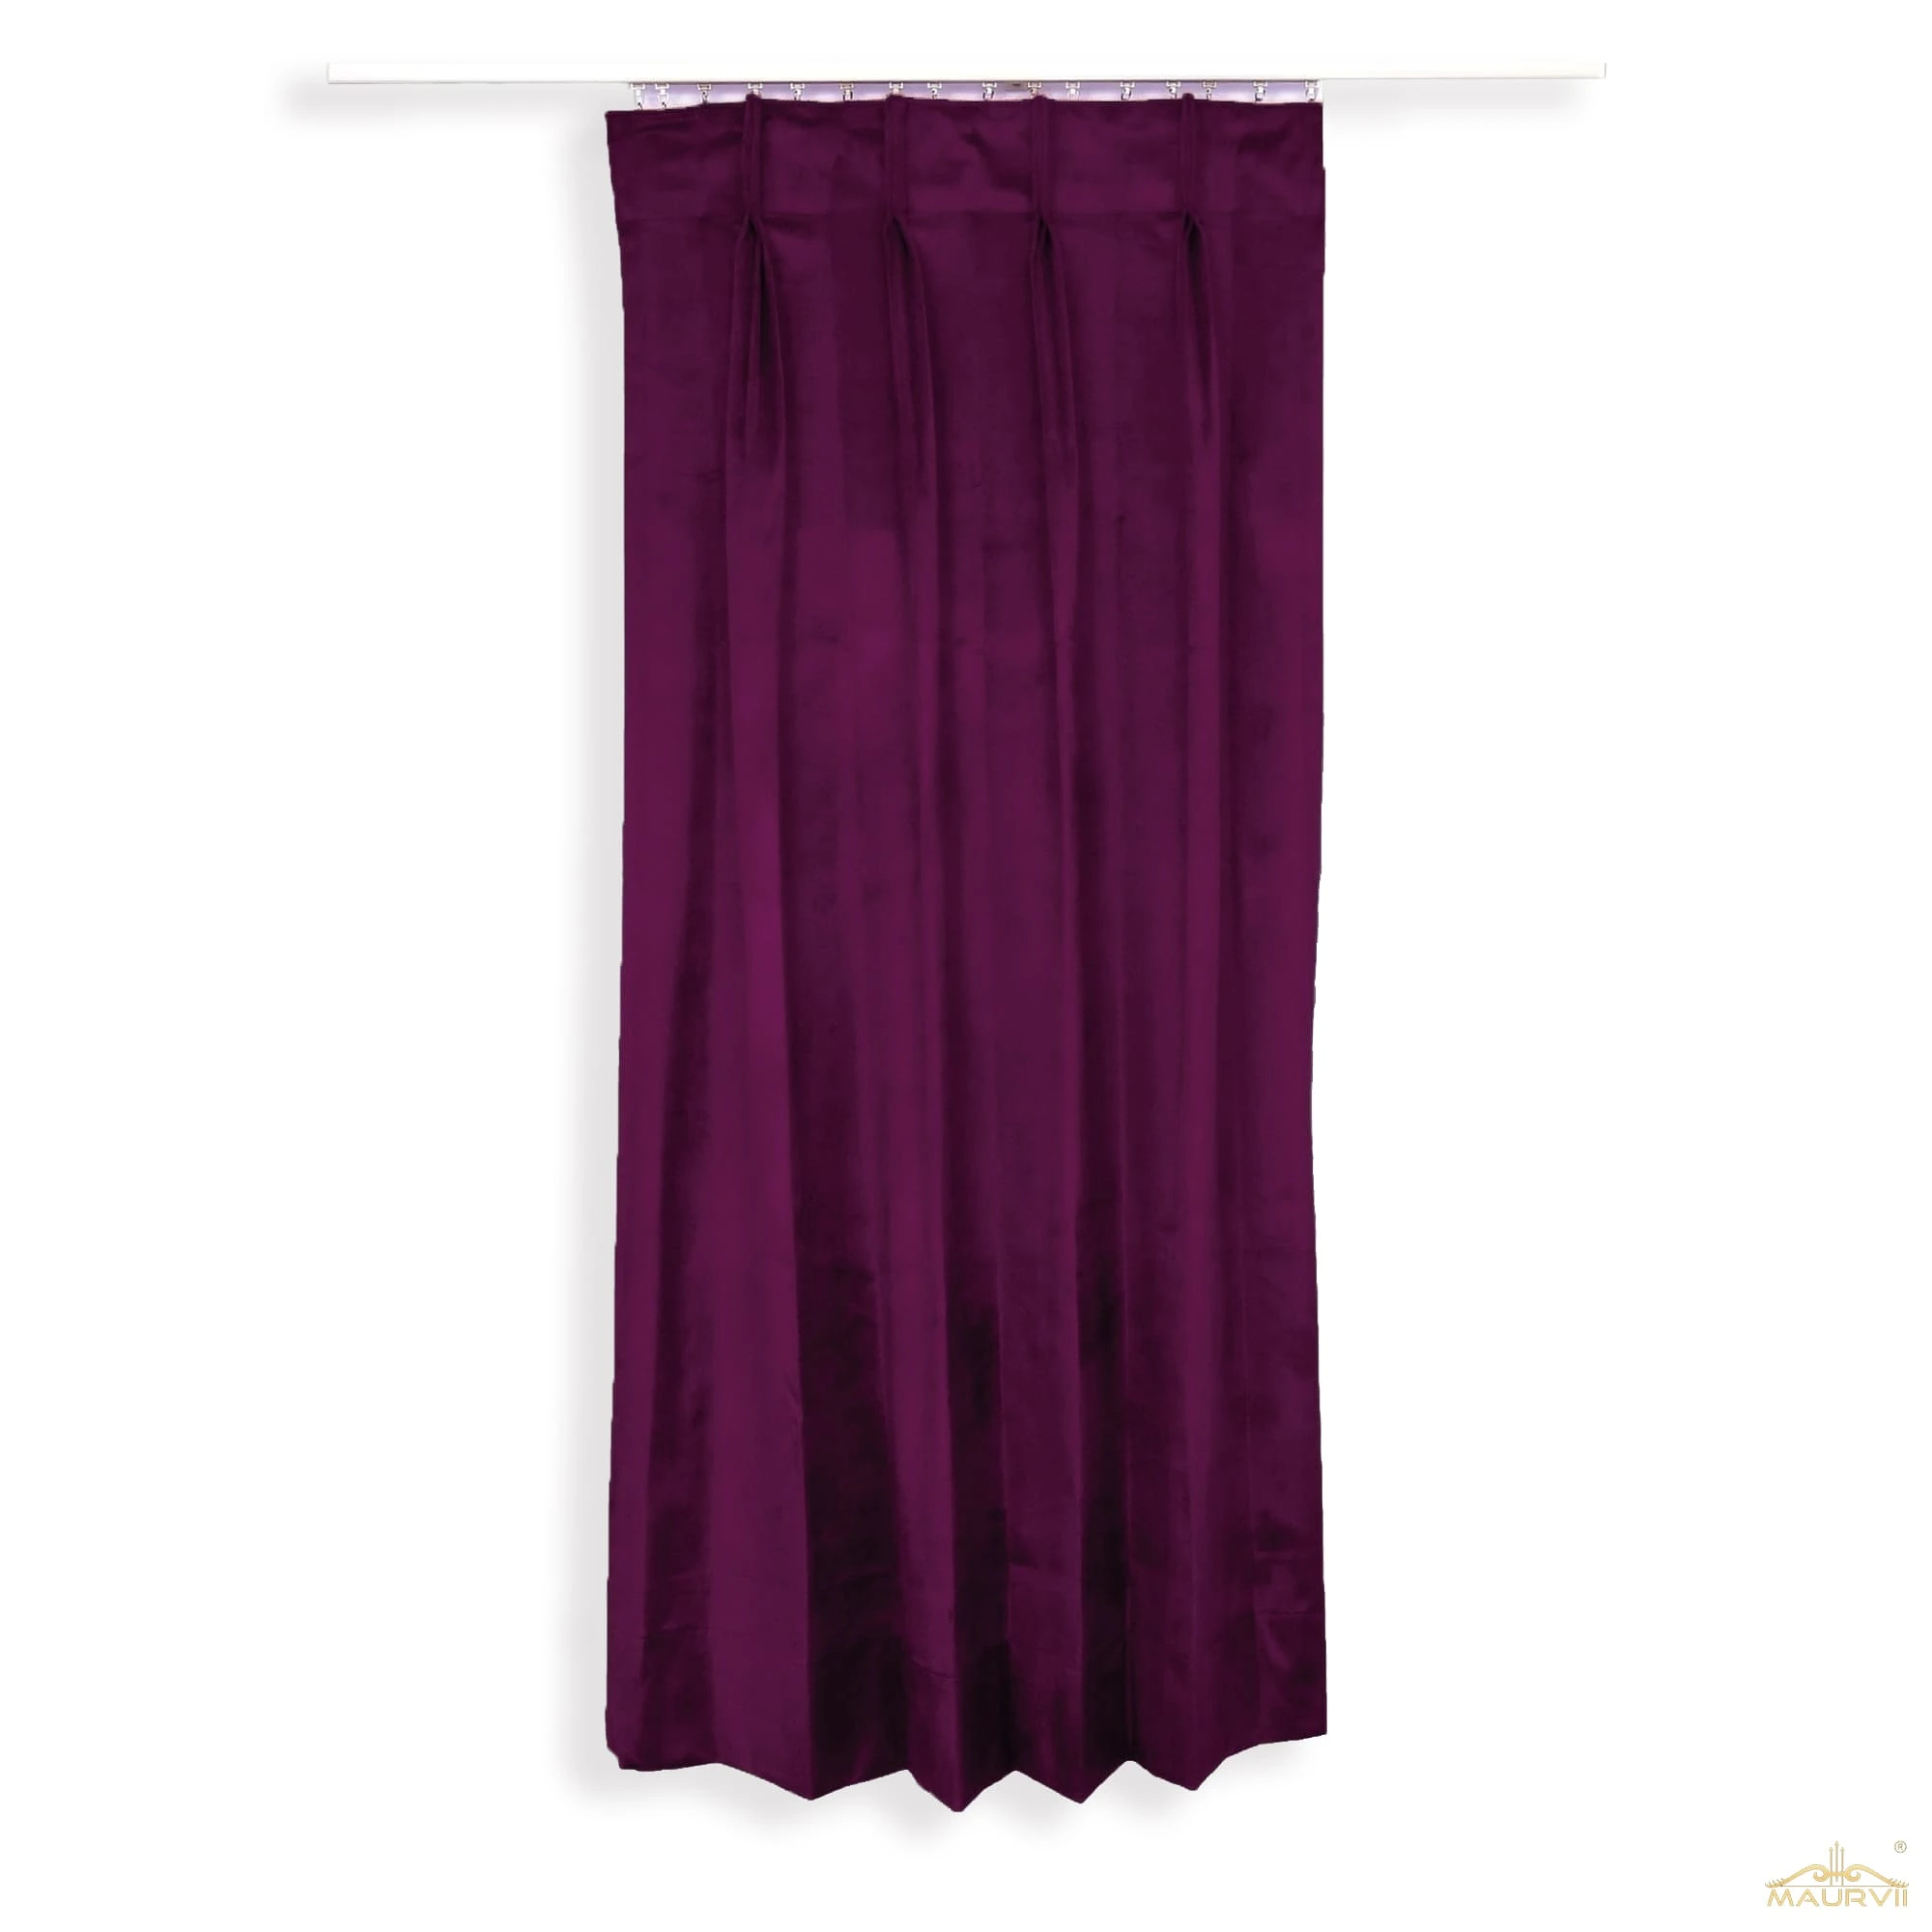 Draperies in plum color for theater